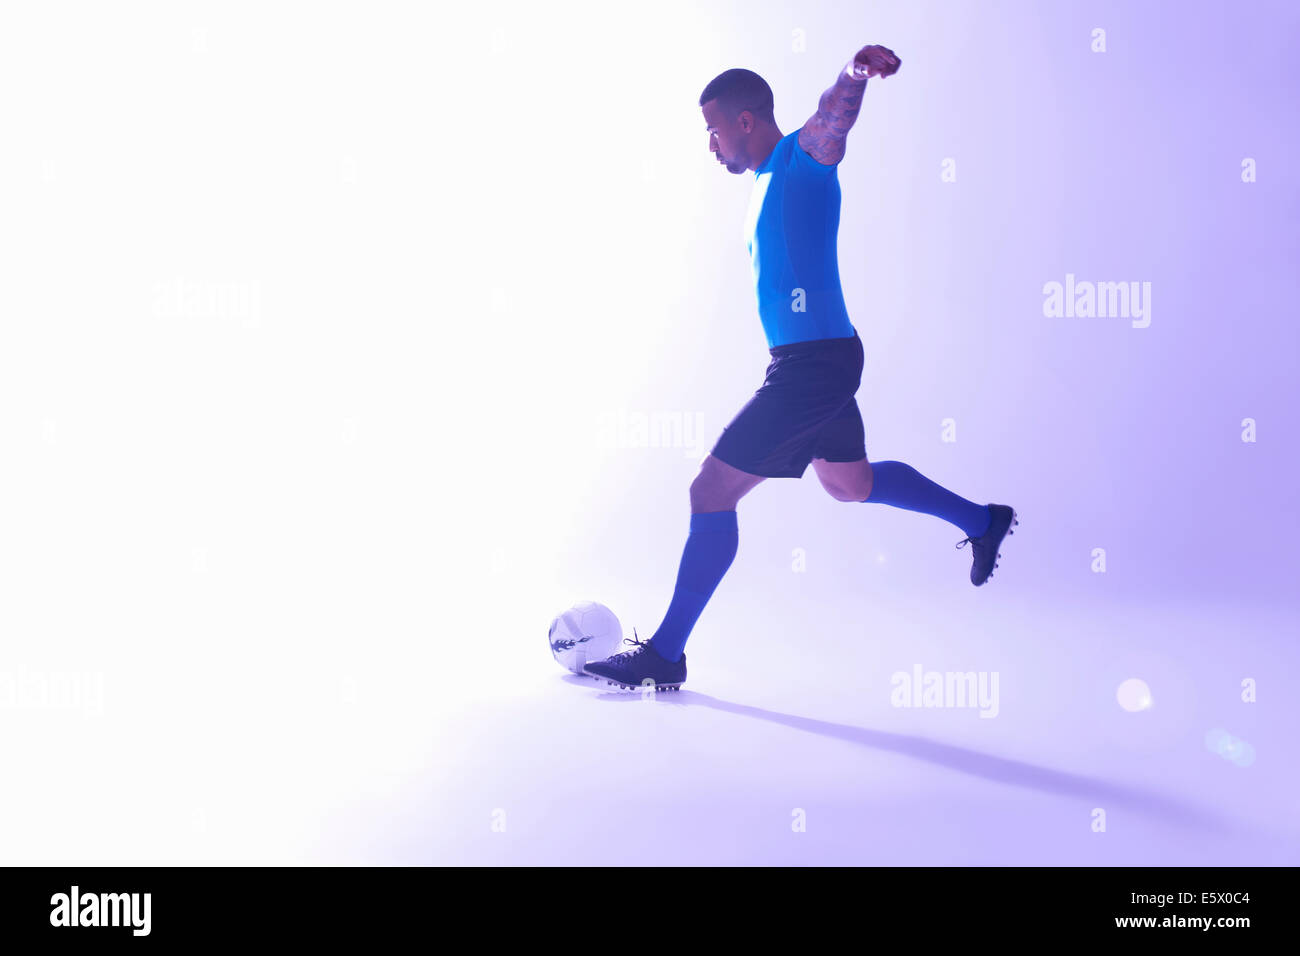 Studio shot of young male soccer player with arms outstretched kicking the ball Stock Photo